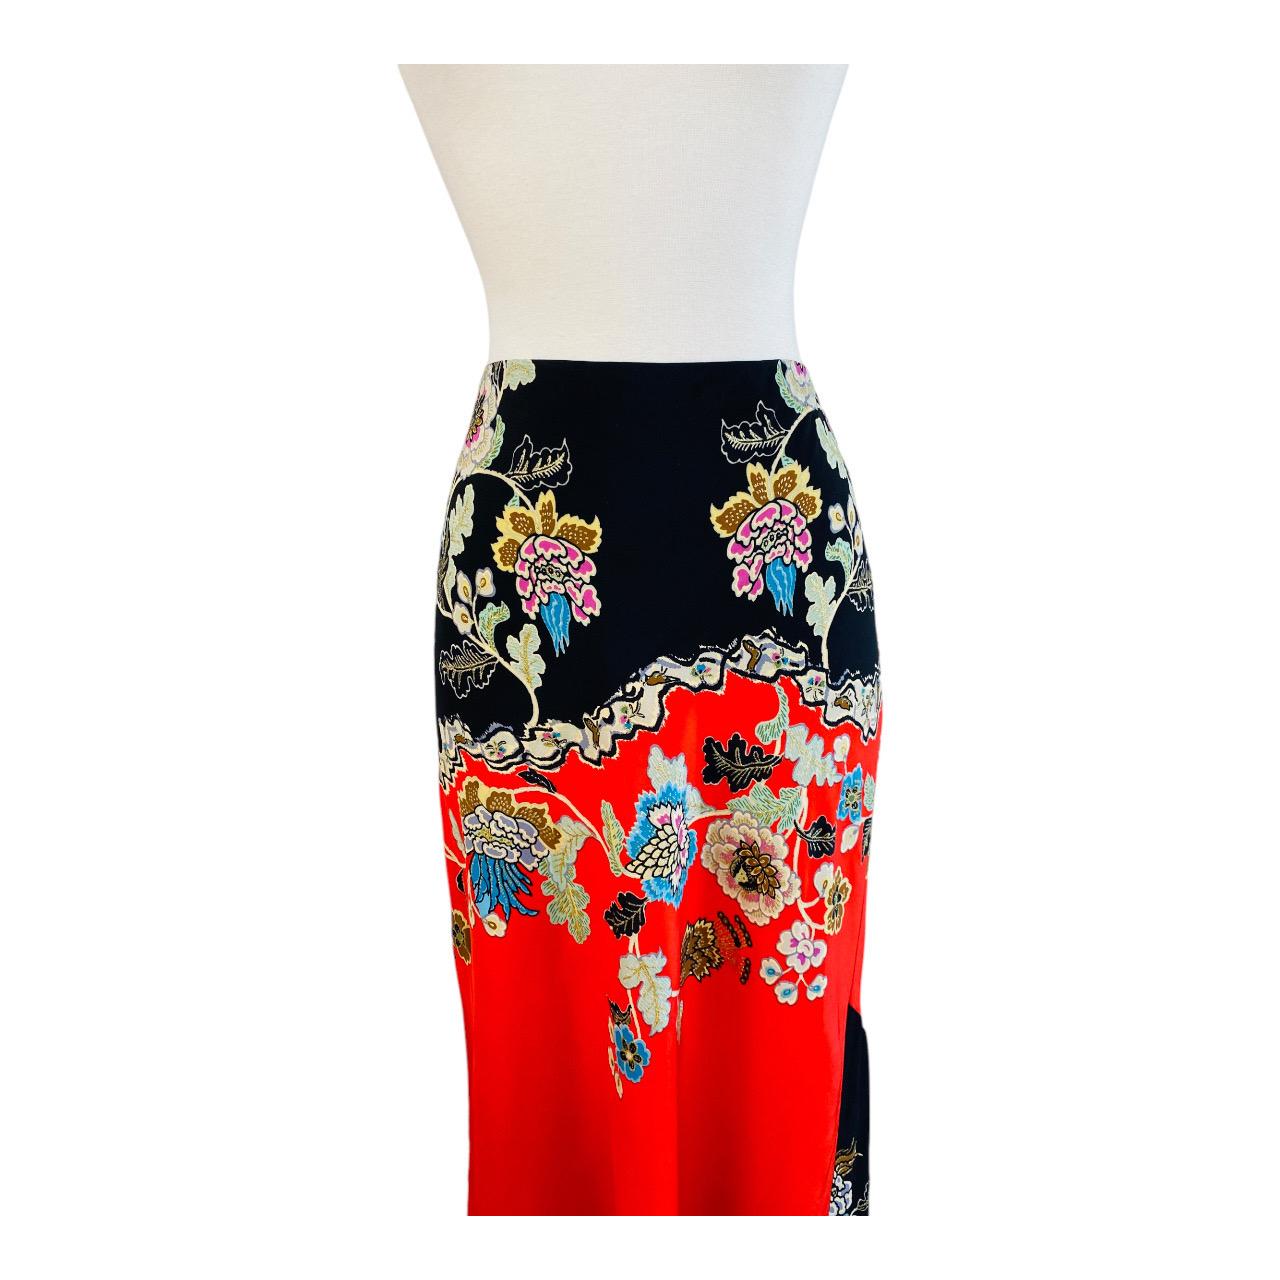 Vintage Roberto Cavalli S/S 2003 Chinoiserie Black + Red Floral Maxi Skirt In Excellent Condition For Sale In Denver, CO